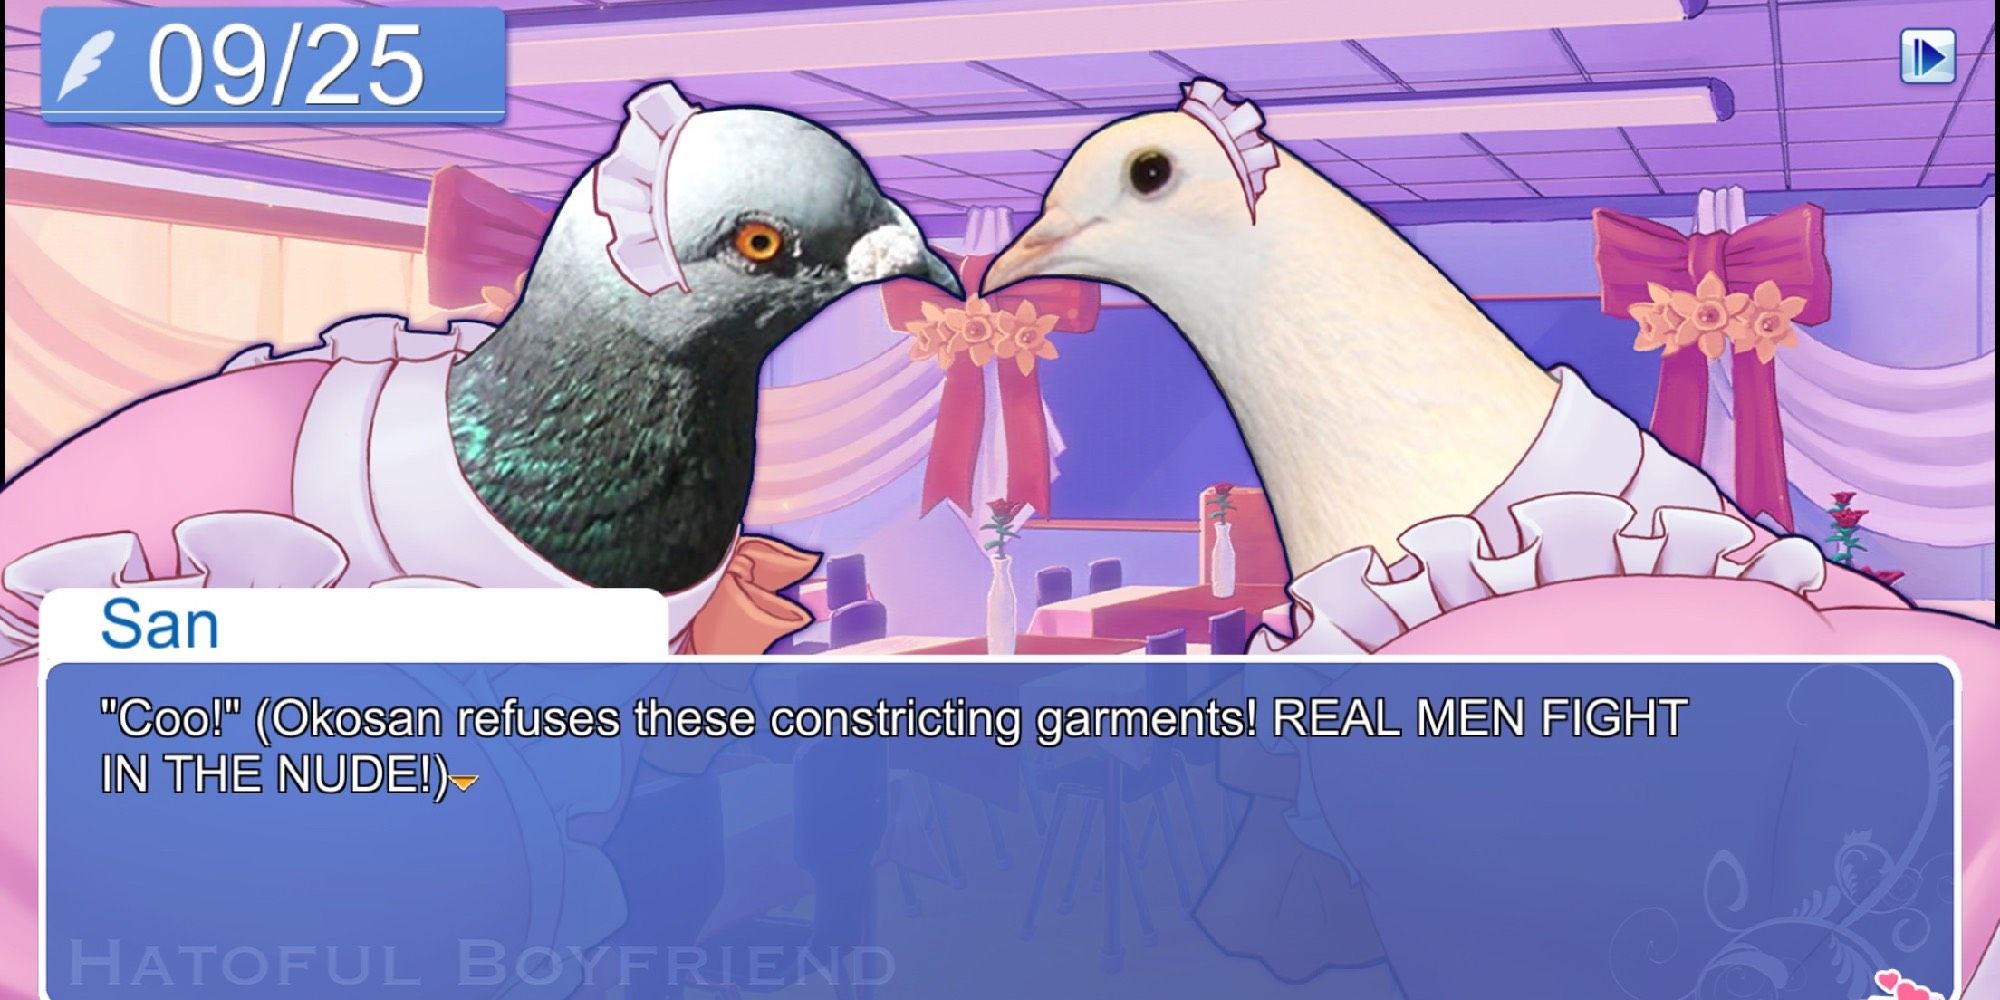 Two pigeons in pink dresses facing each other behind a dialogue box